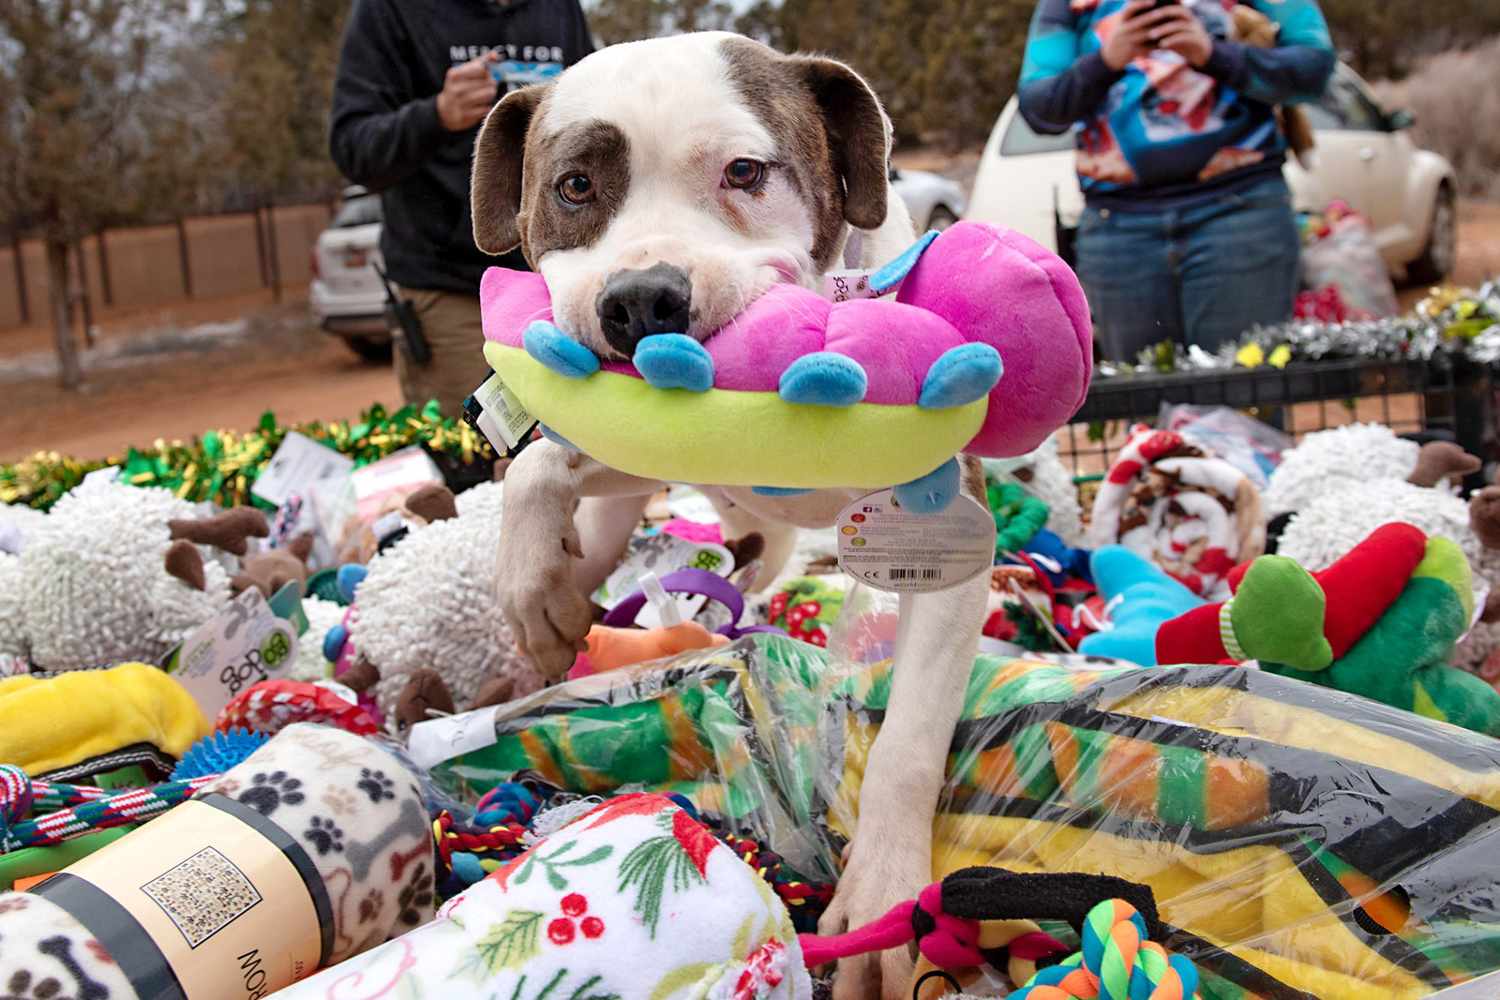 brown and white dog with a toy in mouth on pile of toys